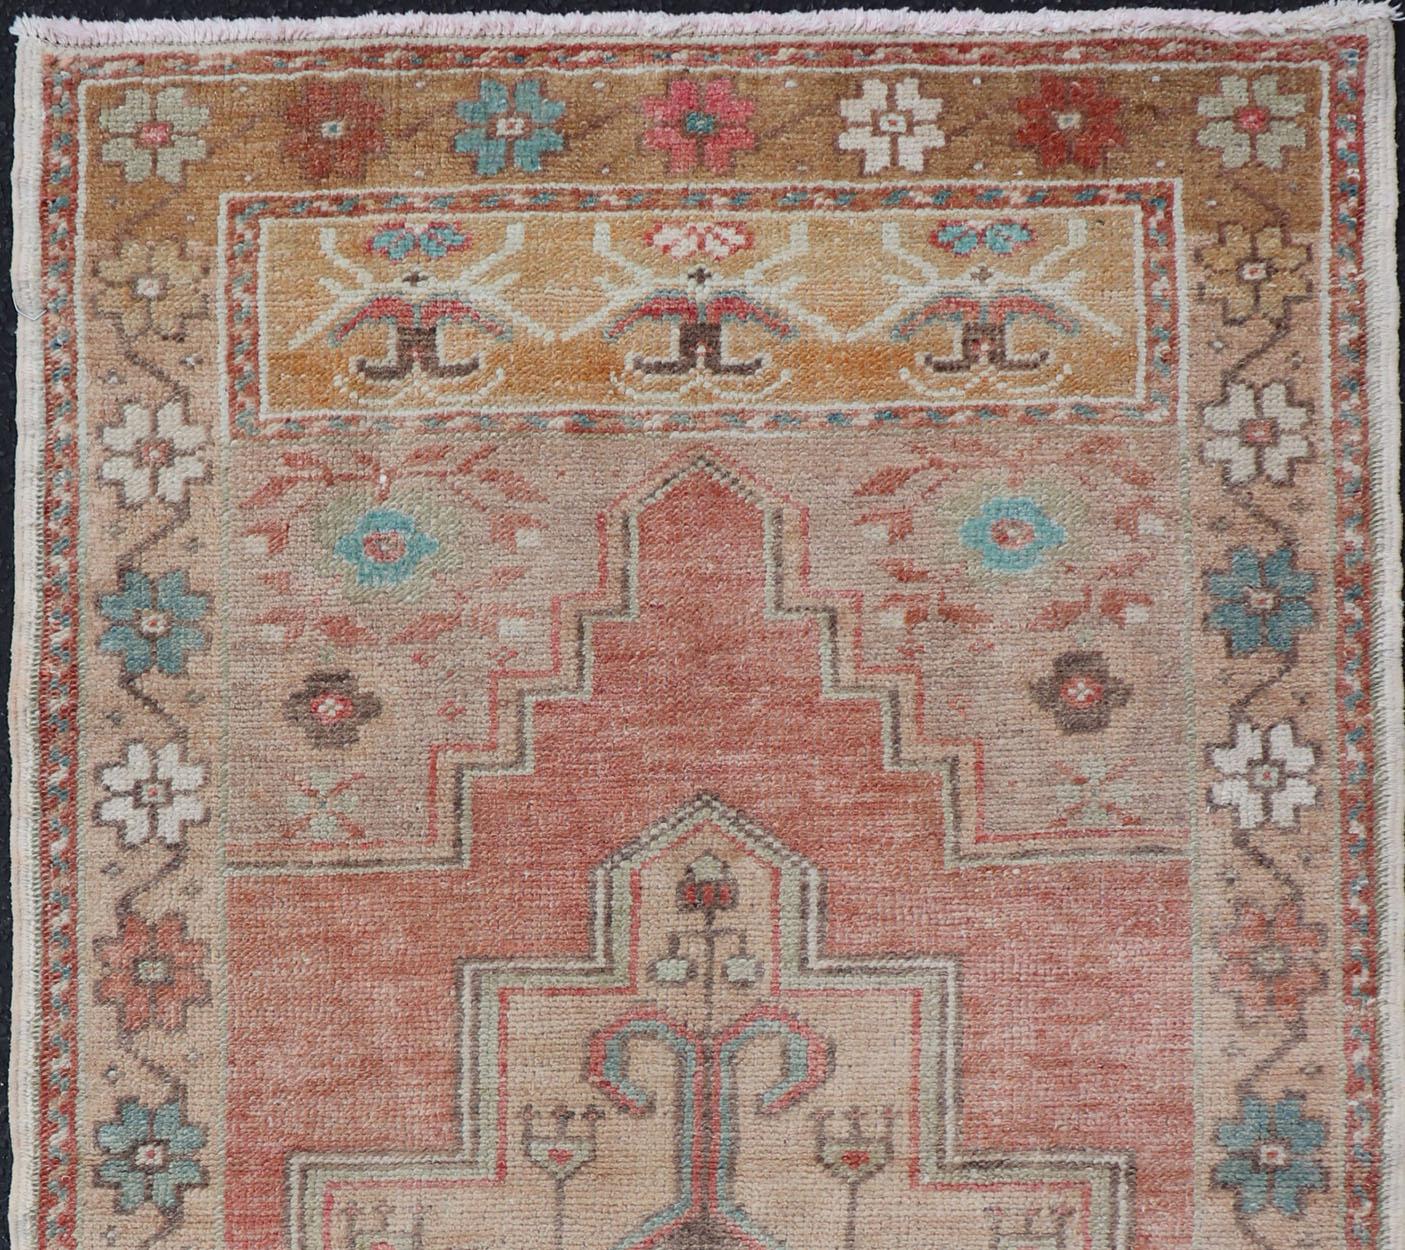 Layered floral medallion design in muted coral and taupe Oushak vintage rug from Turkey, Keivan Woven Arts / rug EN-178019, country of origin / type: Turkey / Oushak, circa 1940

This vintage Turkish Oushak carpet (circa 1940) features a central,